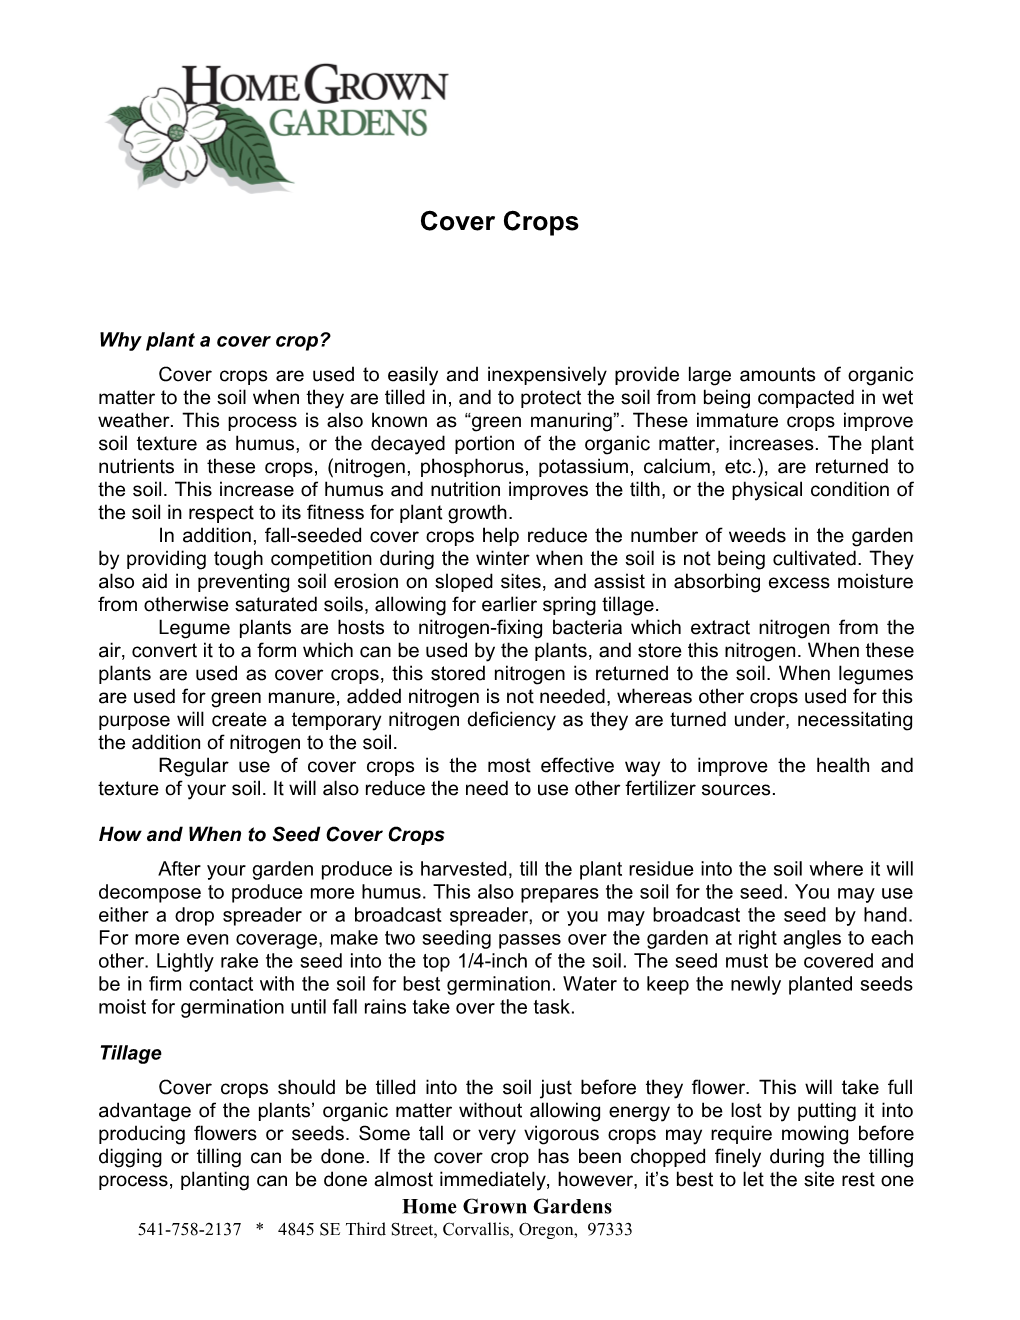 Why Plant a Cover Crop?